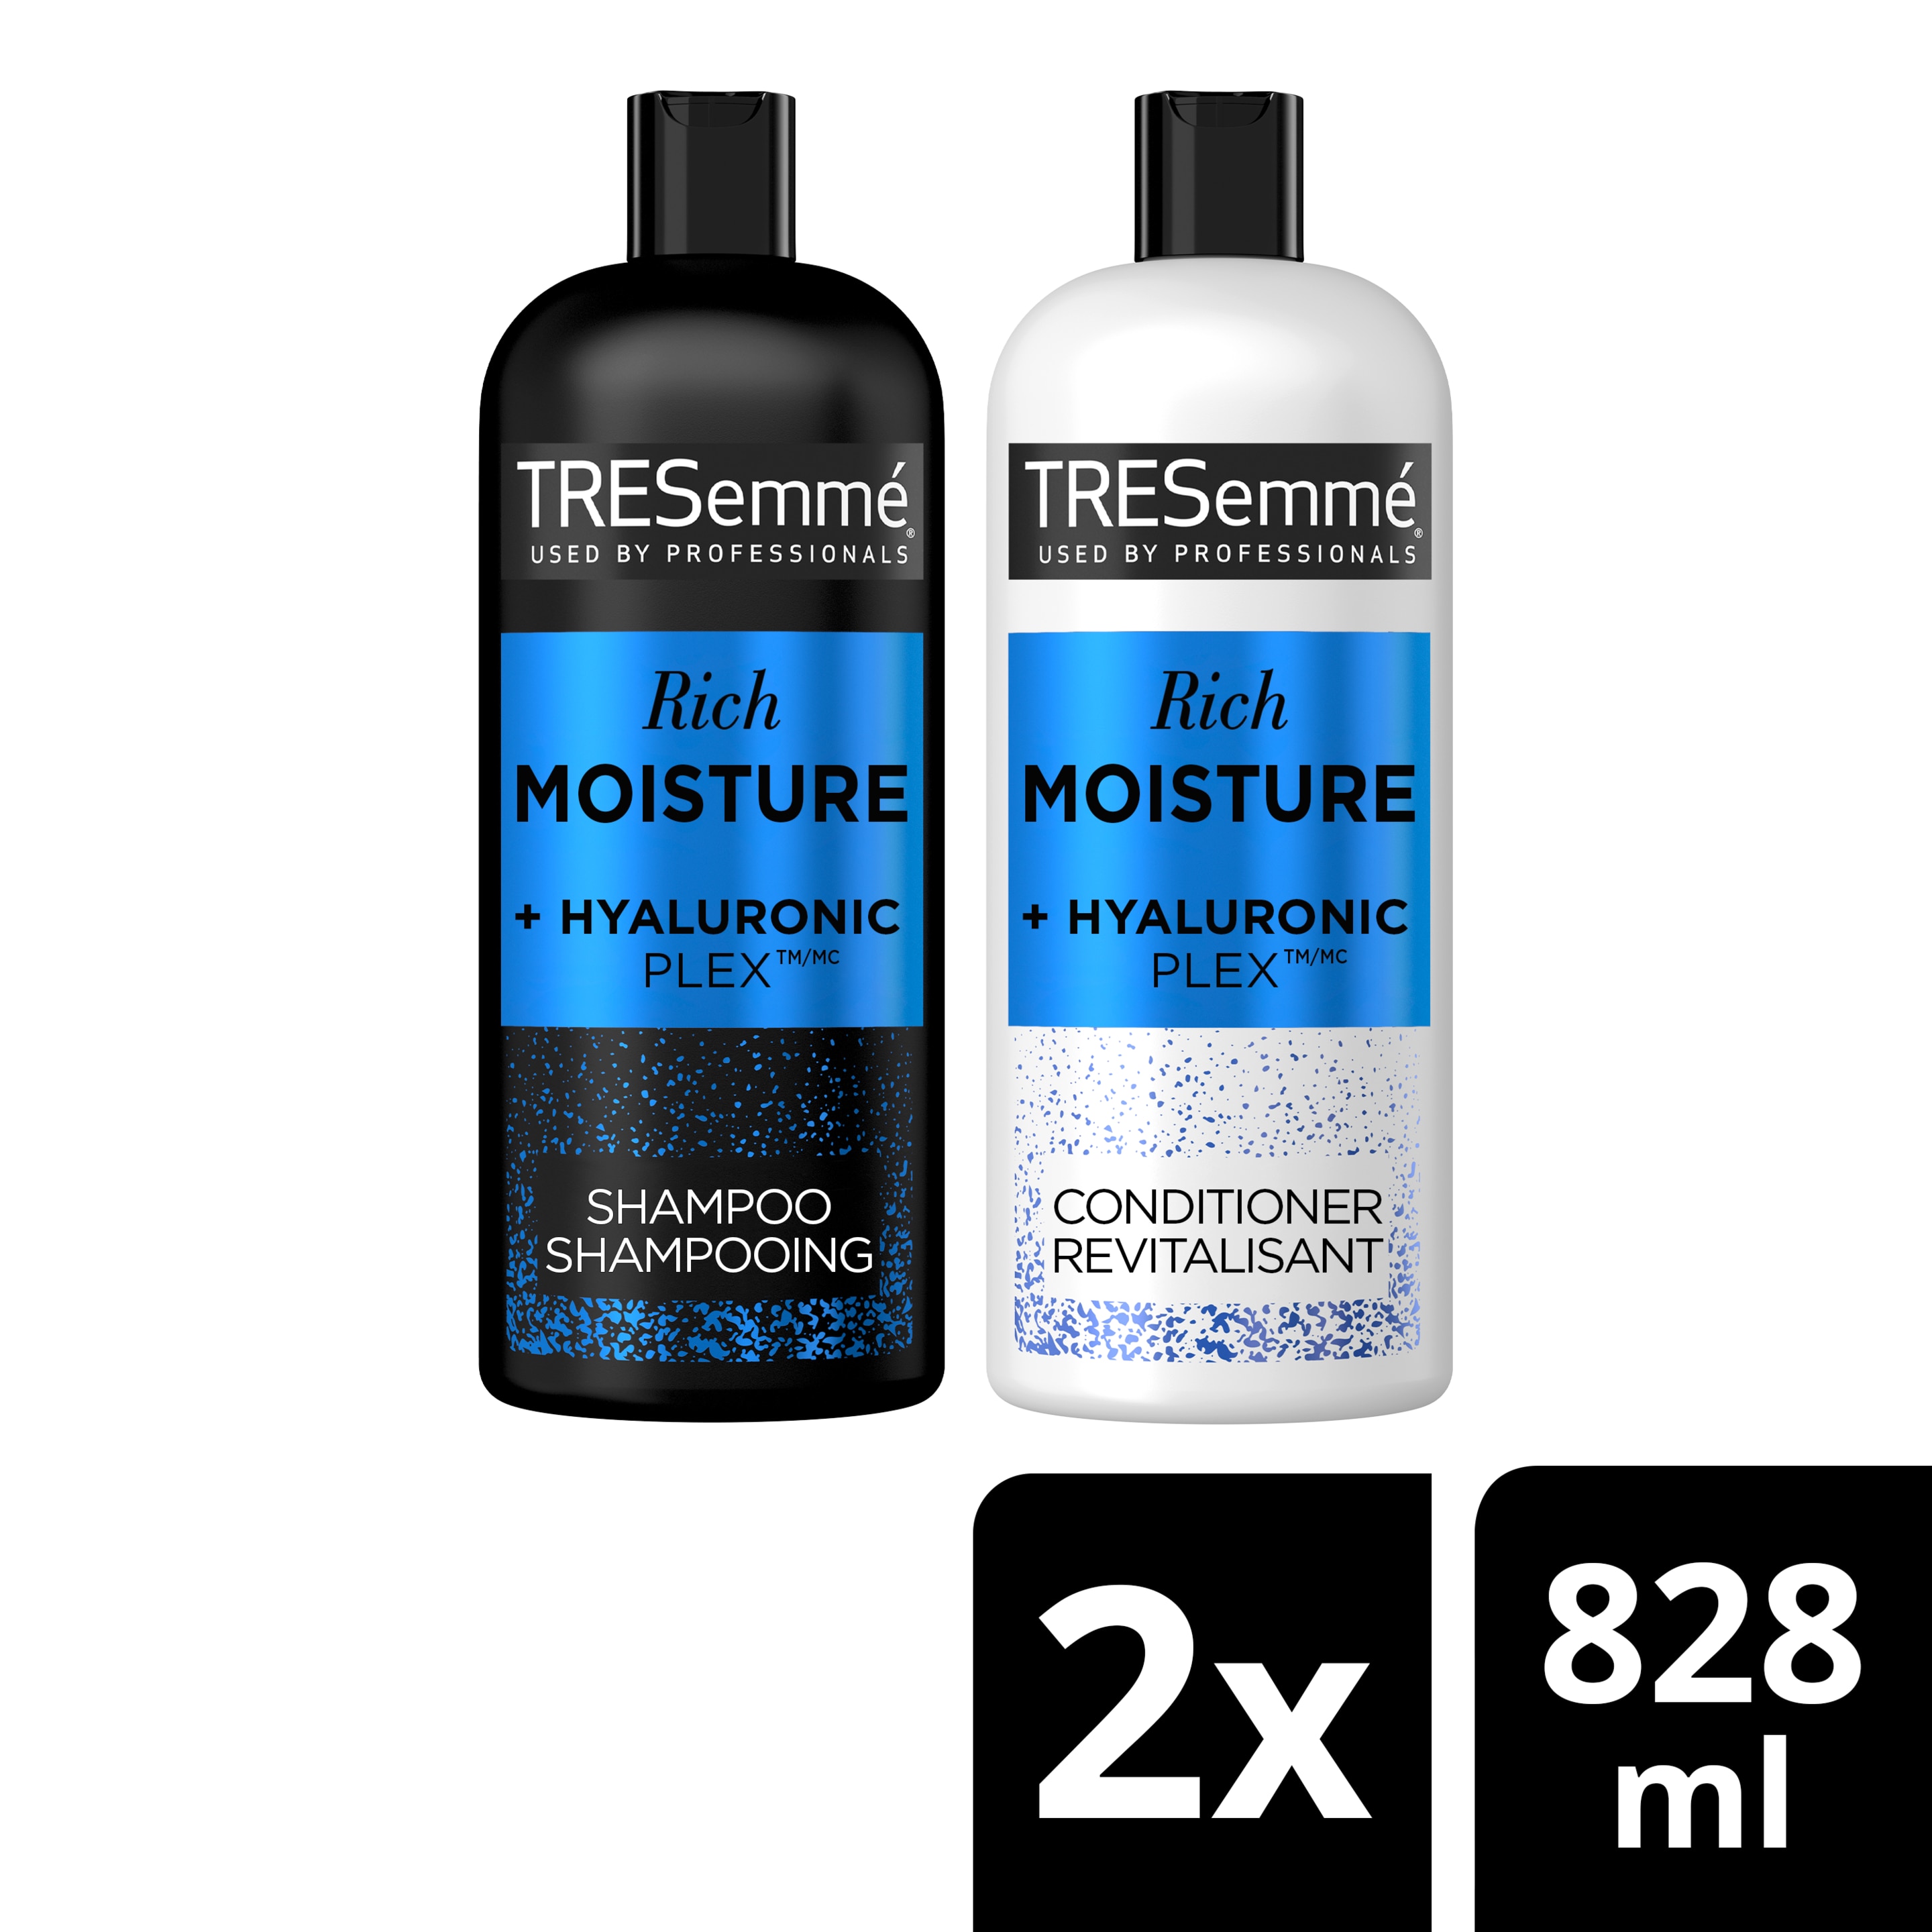 TRESemmé  Twin Pack Shampoo & Conditioner for dry hair Rich Moisture formulated with Pro Style Tech 828 ml 2 Bundle Pack